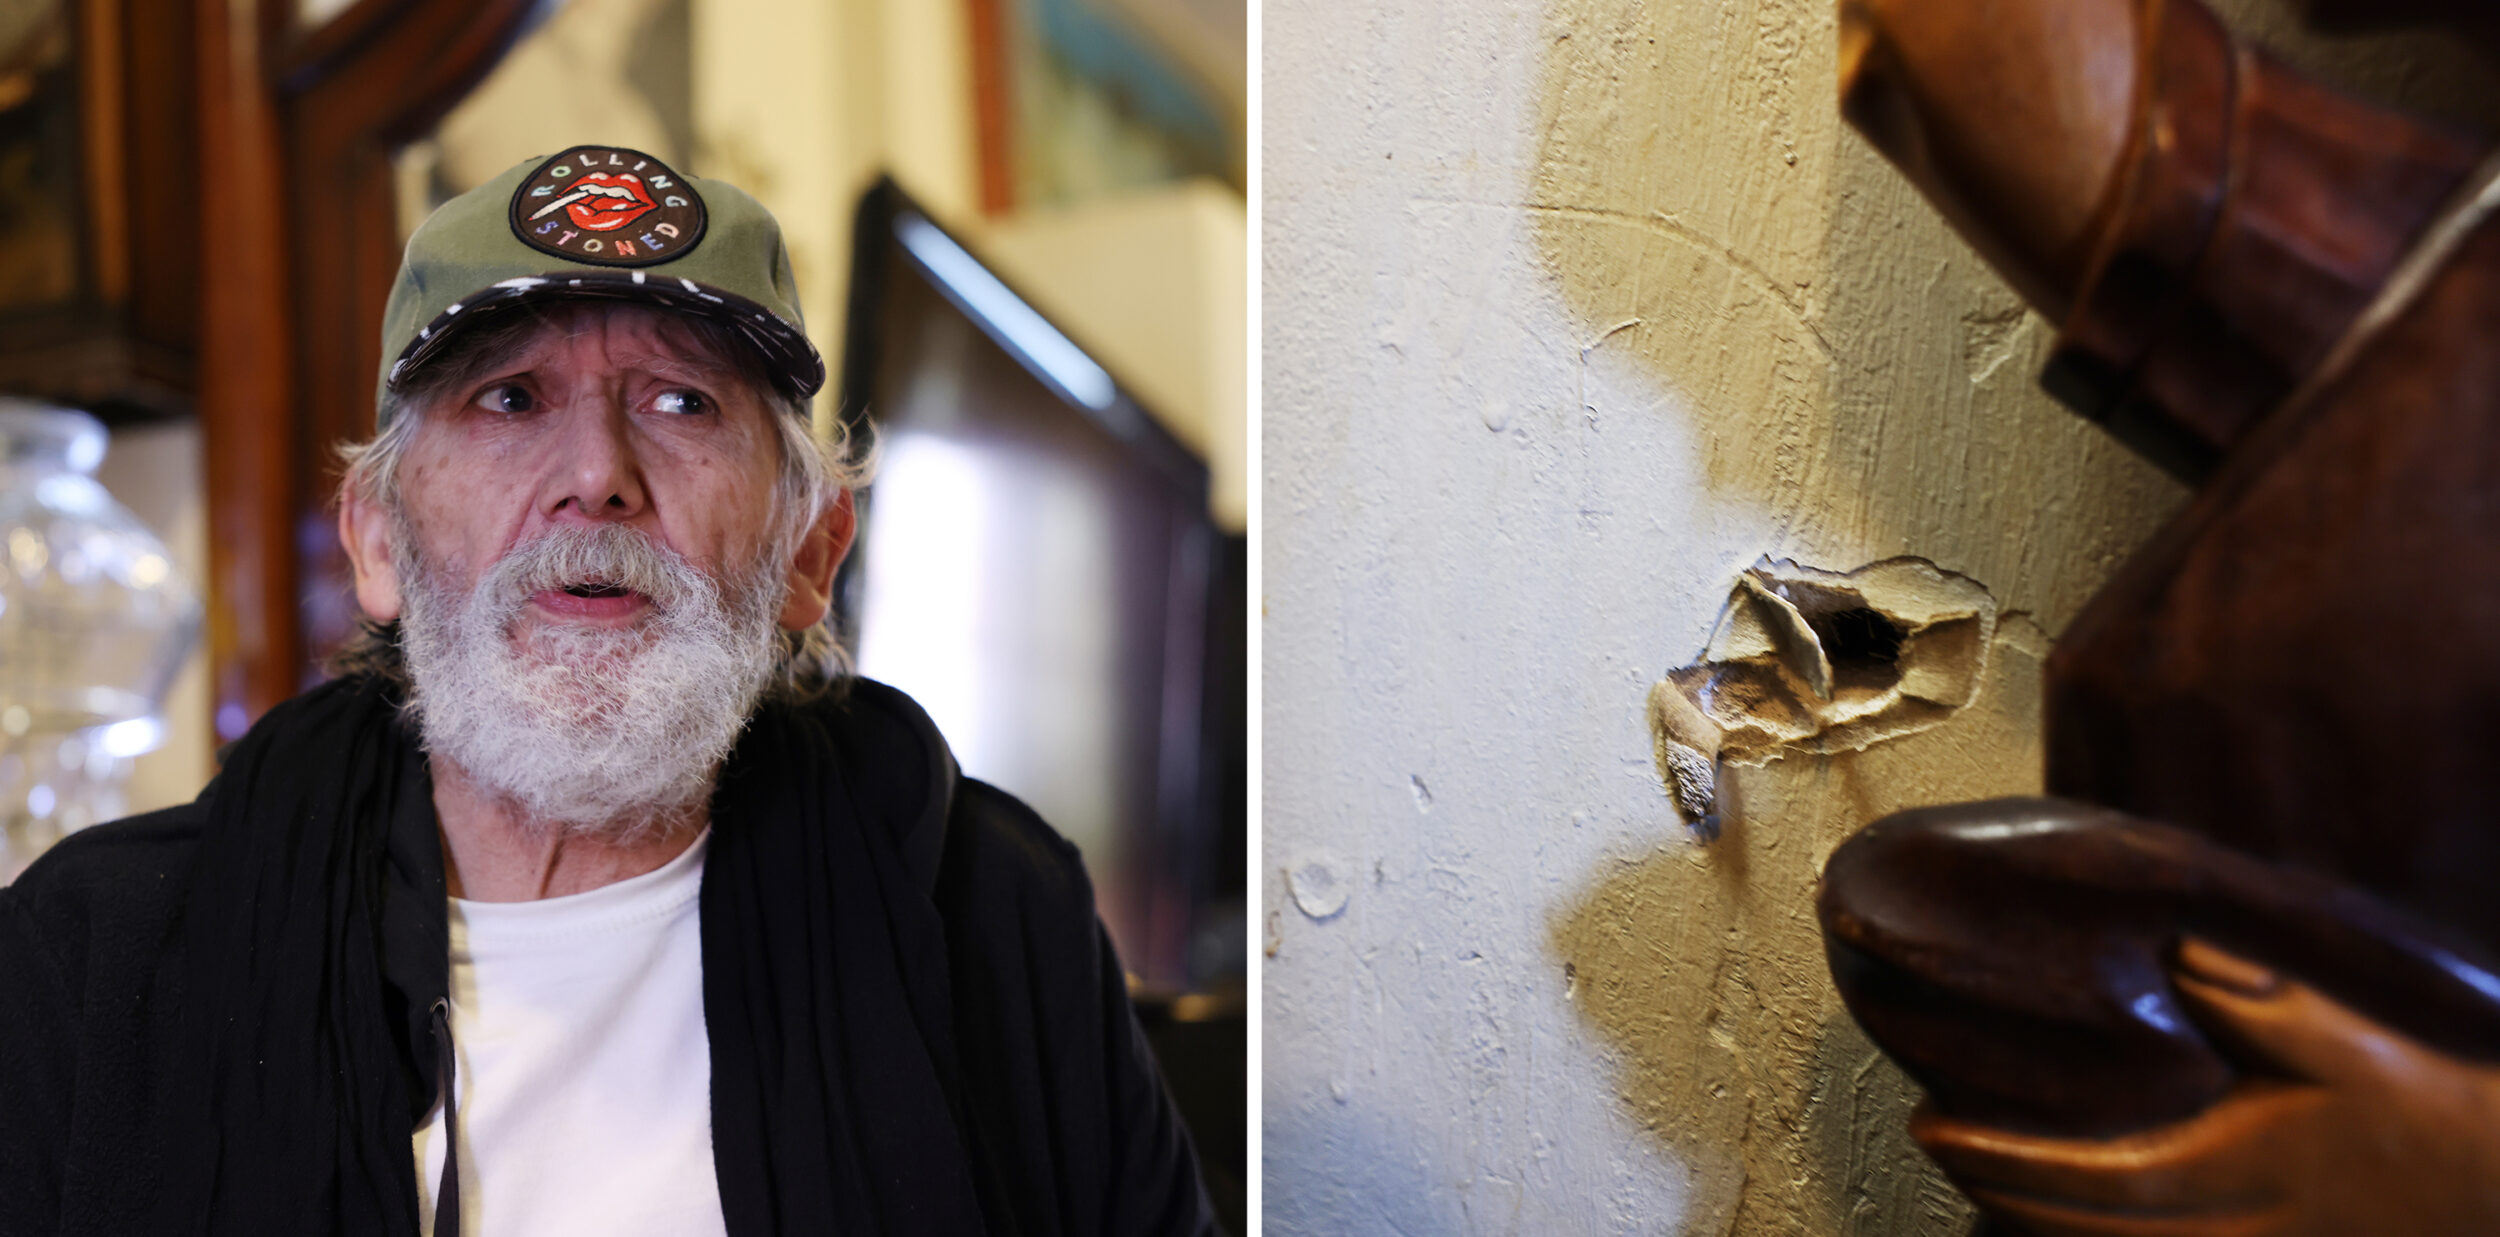 An elderly man in a cap and an image of a damaged wall next to a wooden sculpture's hand.